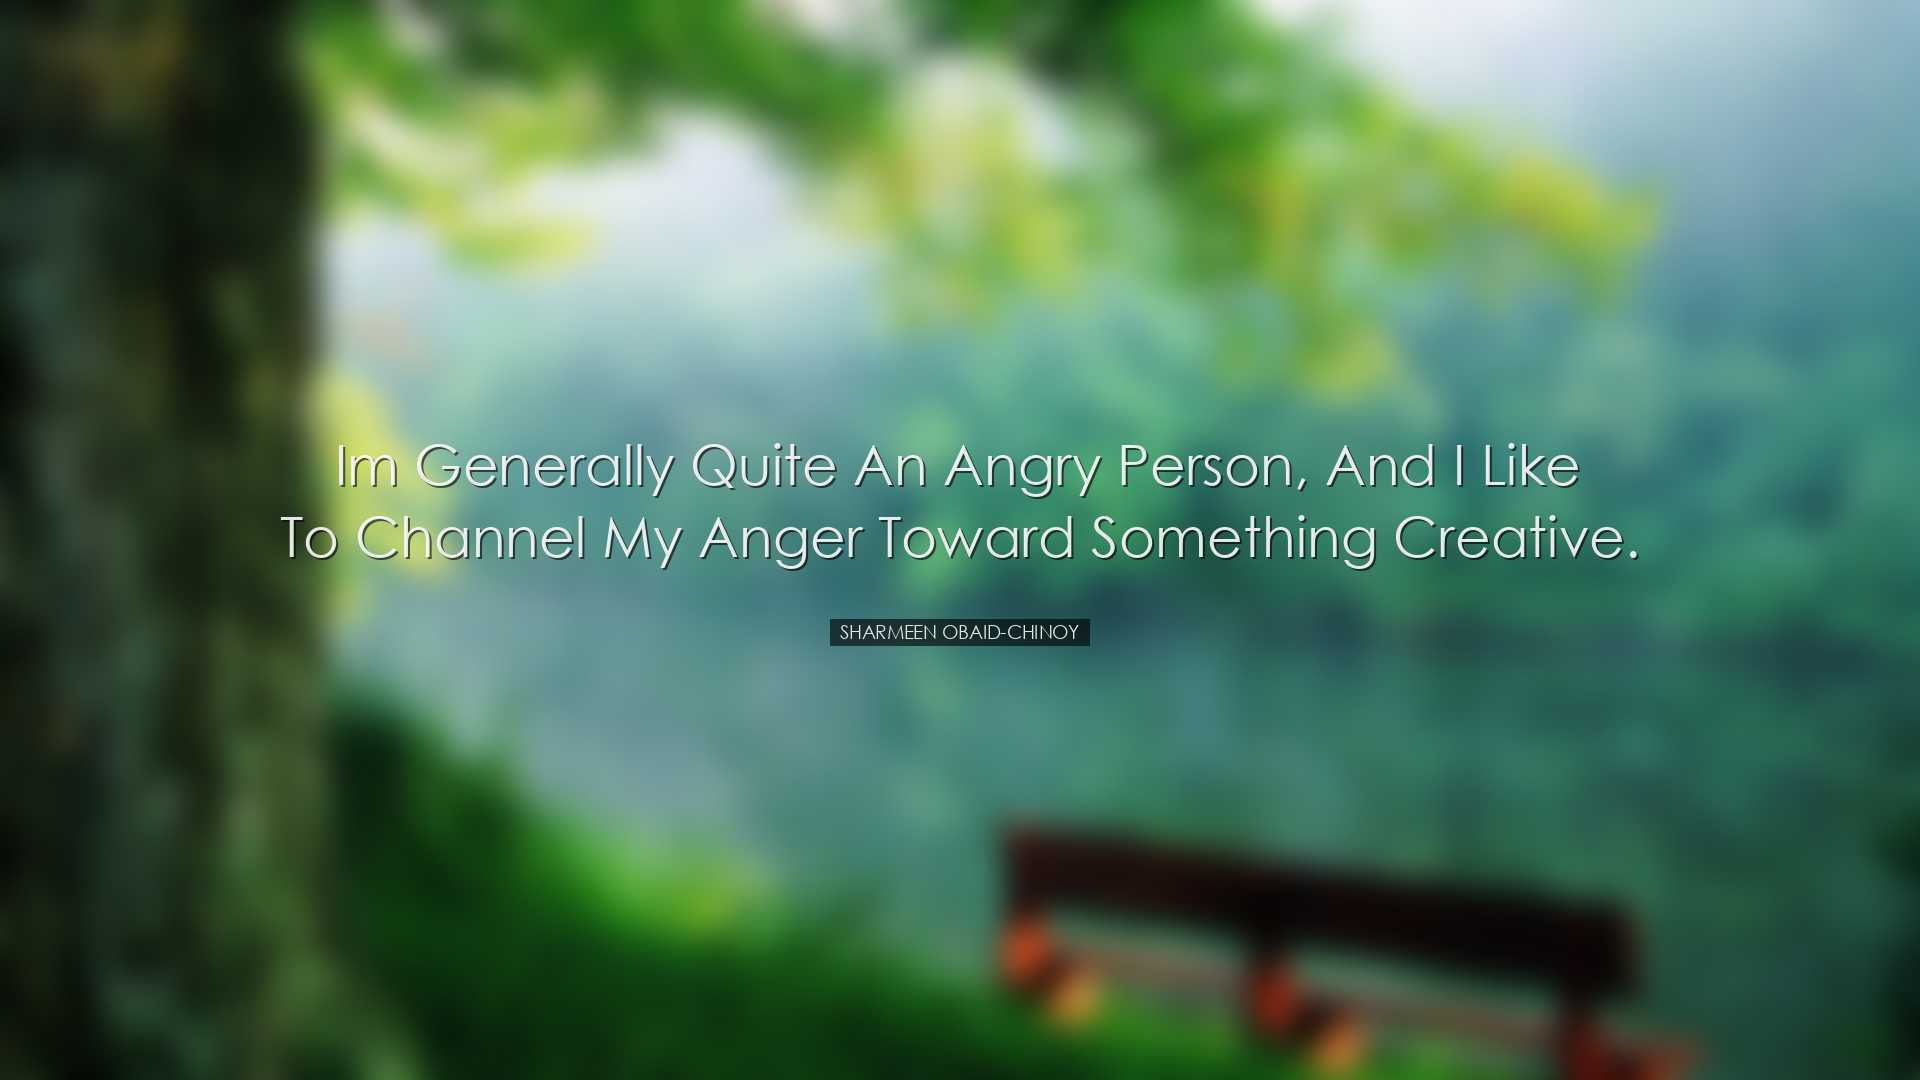 Im generally quite an angry person, and I like to channel my anger